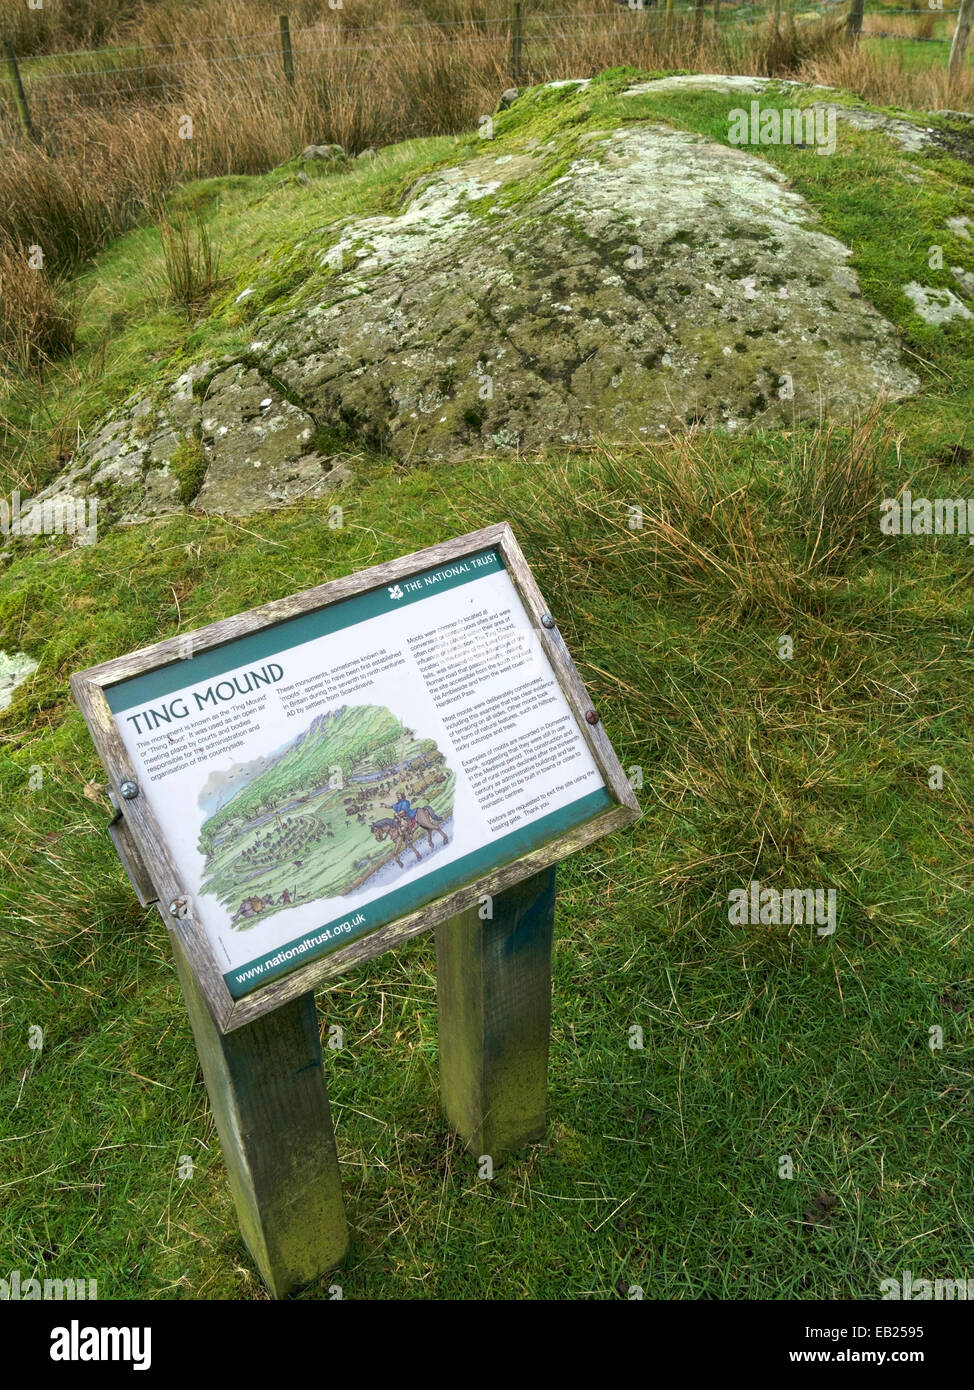 Ancient monument 'Ting mound' or 'Thing Moot' and information sign, Little Langdale, Cumbria, England, UK Stock Photo